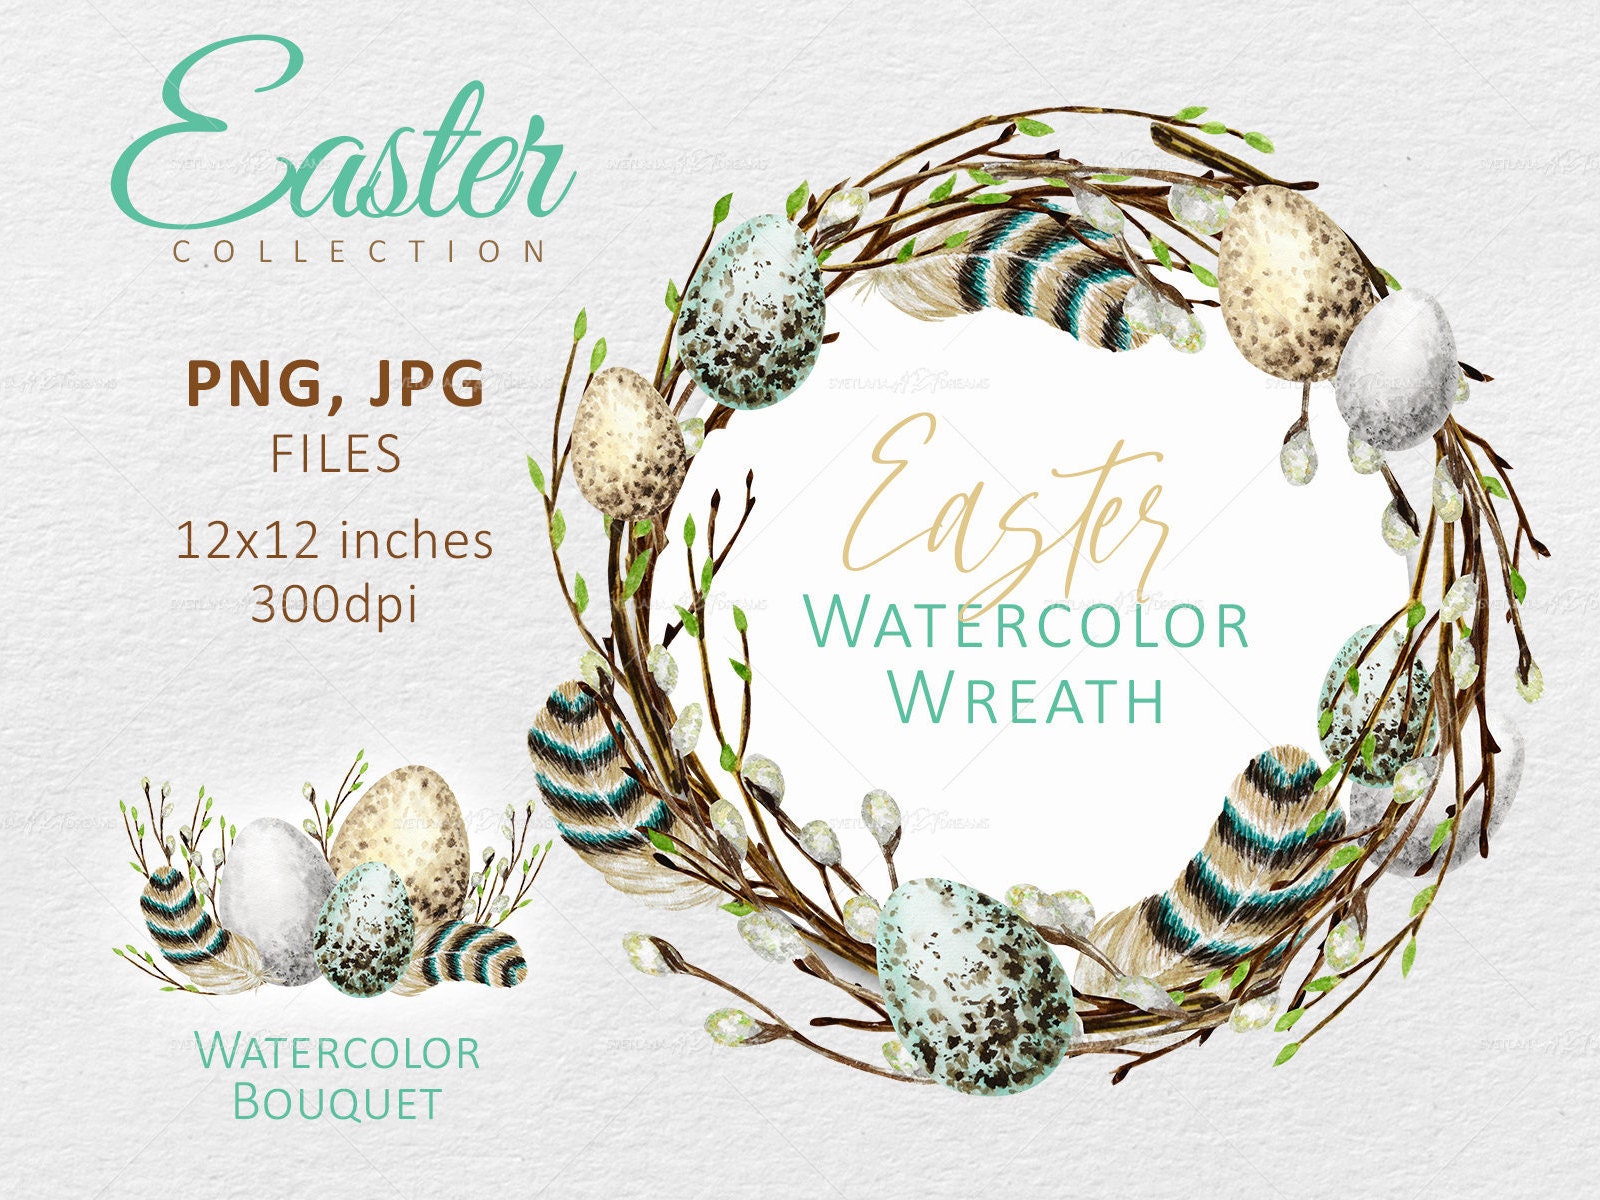 Buy Bethany Lowe 24 Light Green Spring Easter Feather Tree with Pink Tips  Online at desertcartINDIA